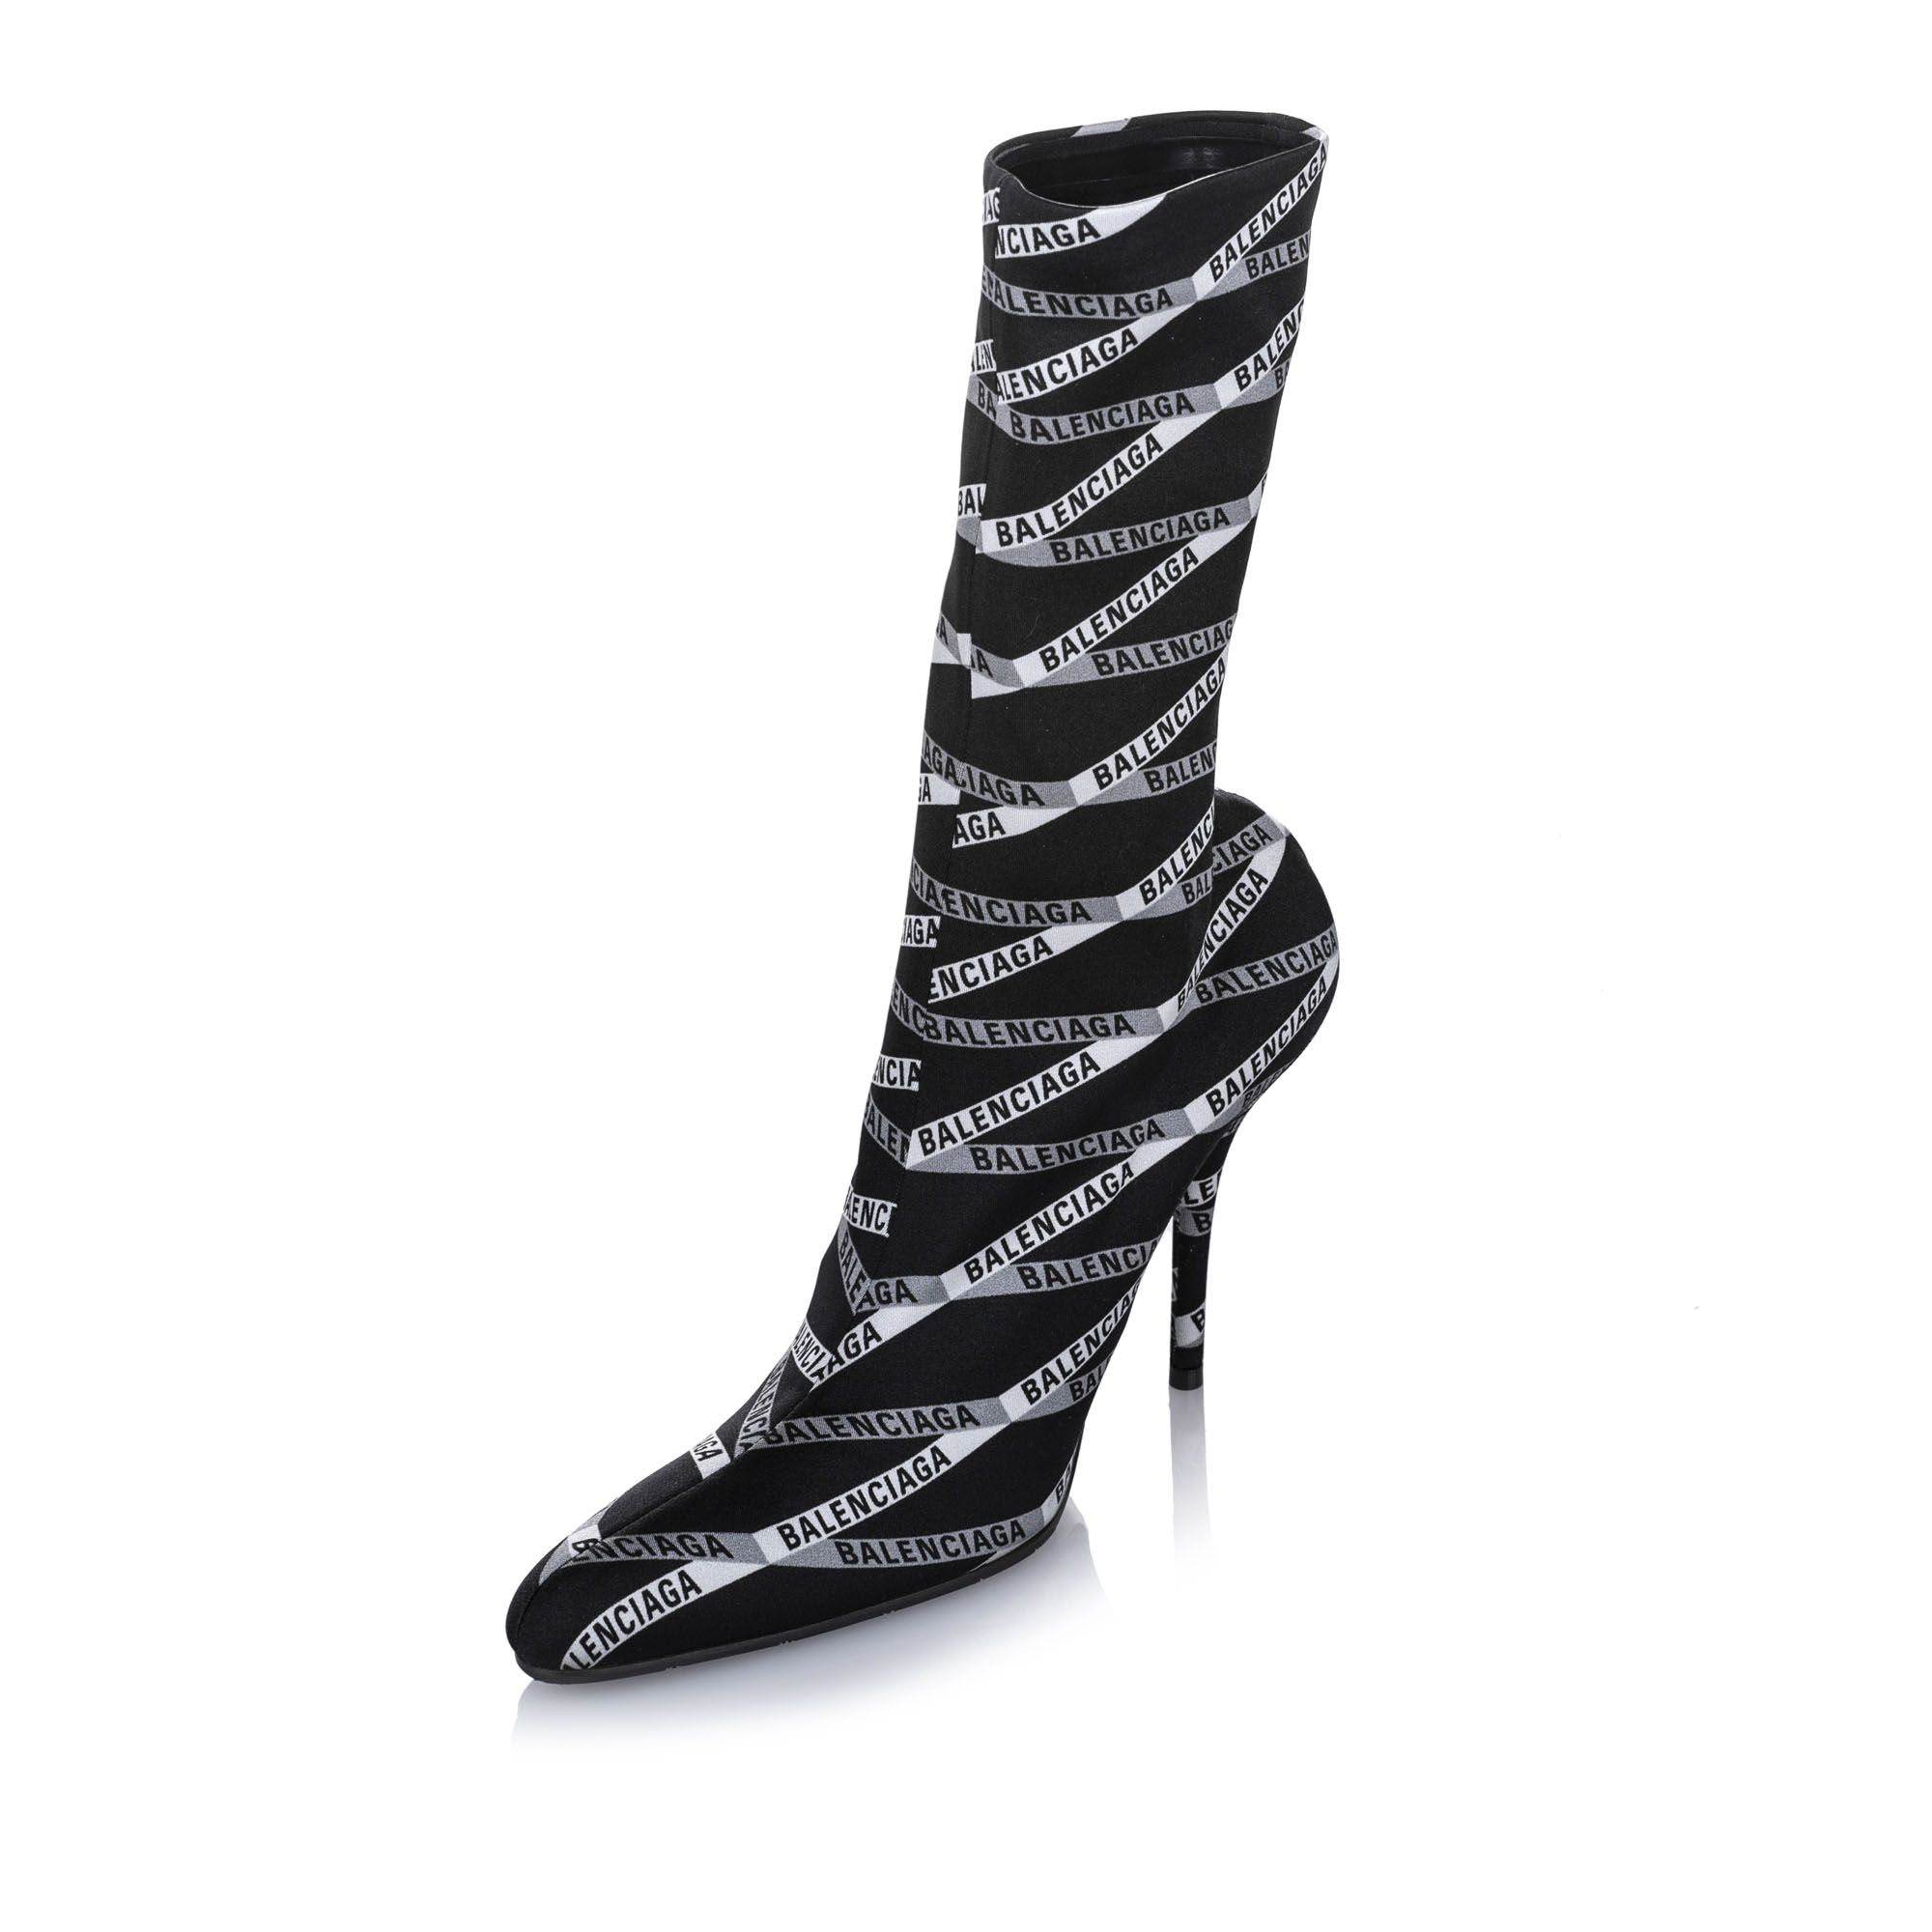 These boots feature a printed jersey crepe upper, leather insoles, stiletto heels, and leather soles. Heel height: 8 cm.
Dimensions:
Length 23cm
Width 7cm

Original Accessories: Dust Bag, Box

Serial Number: 549784
Color: Black x White
Material: Fabric x Others x Leather x Calf
Country of Origin: Italy
Boutique Reference: SSU80324K1342


Product Rating: New